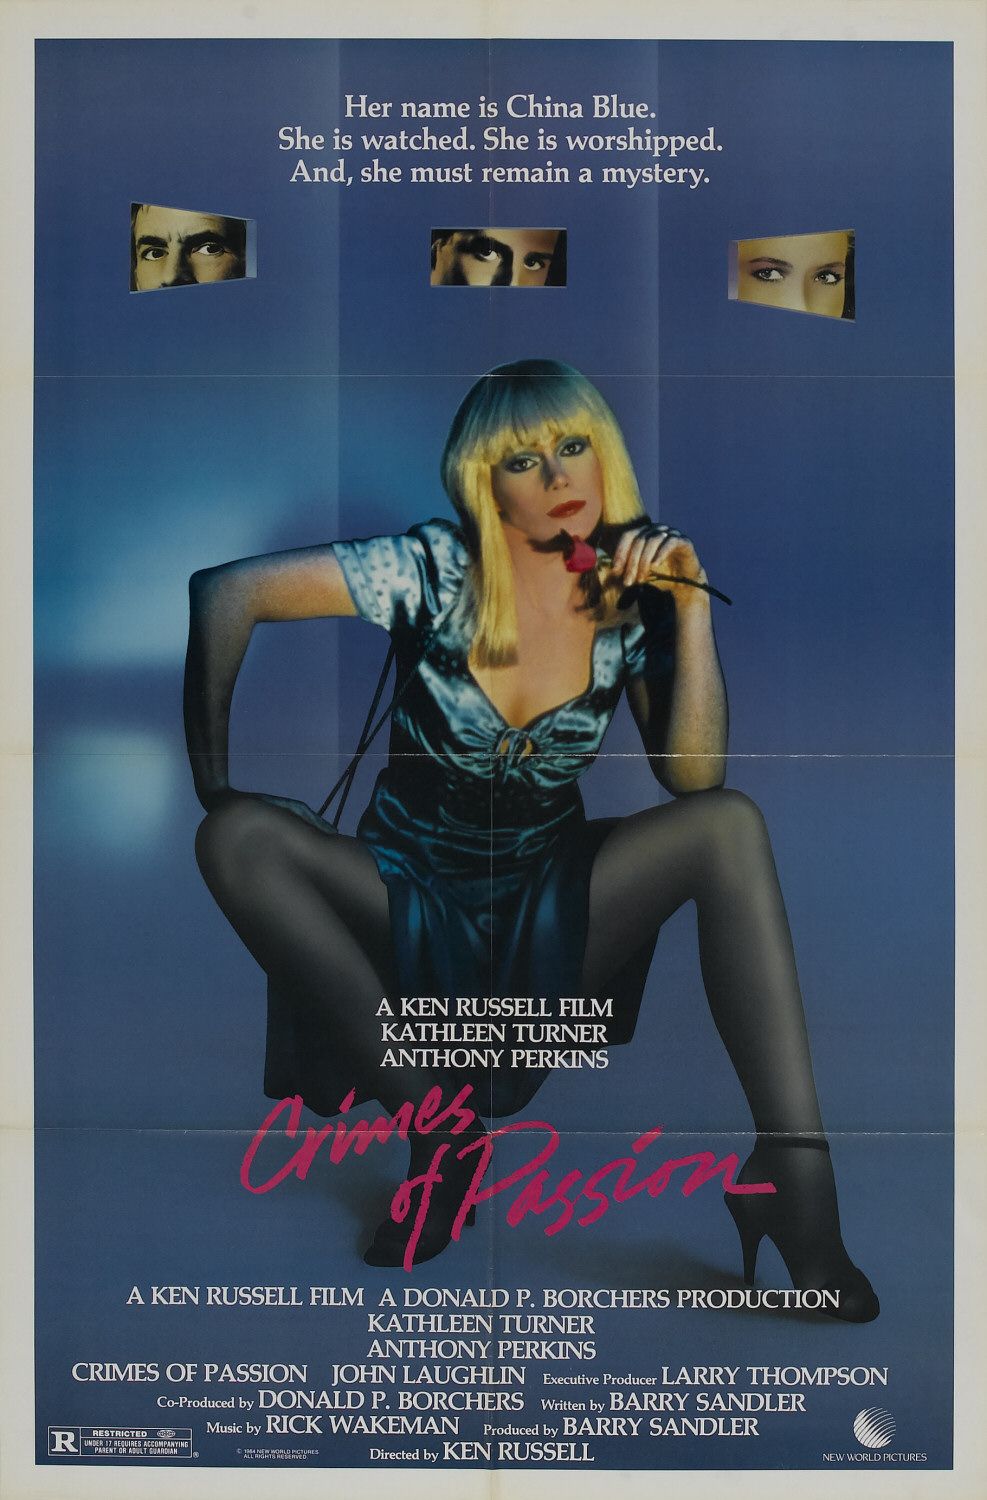 Extra Large Movie Poster Image for Crimes of Passion 